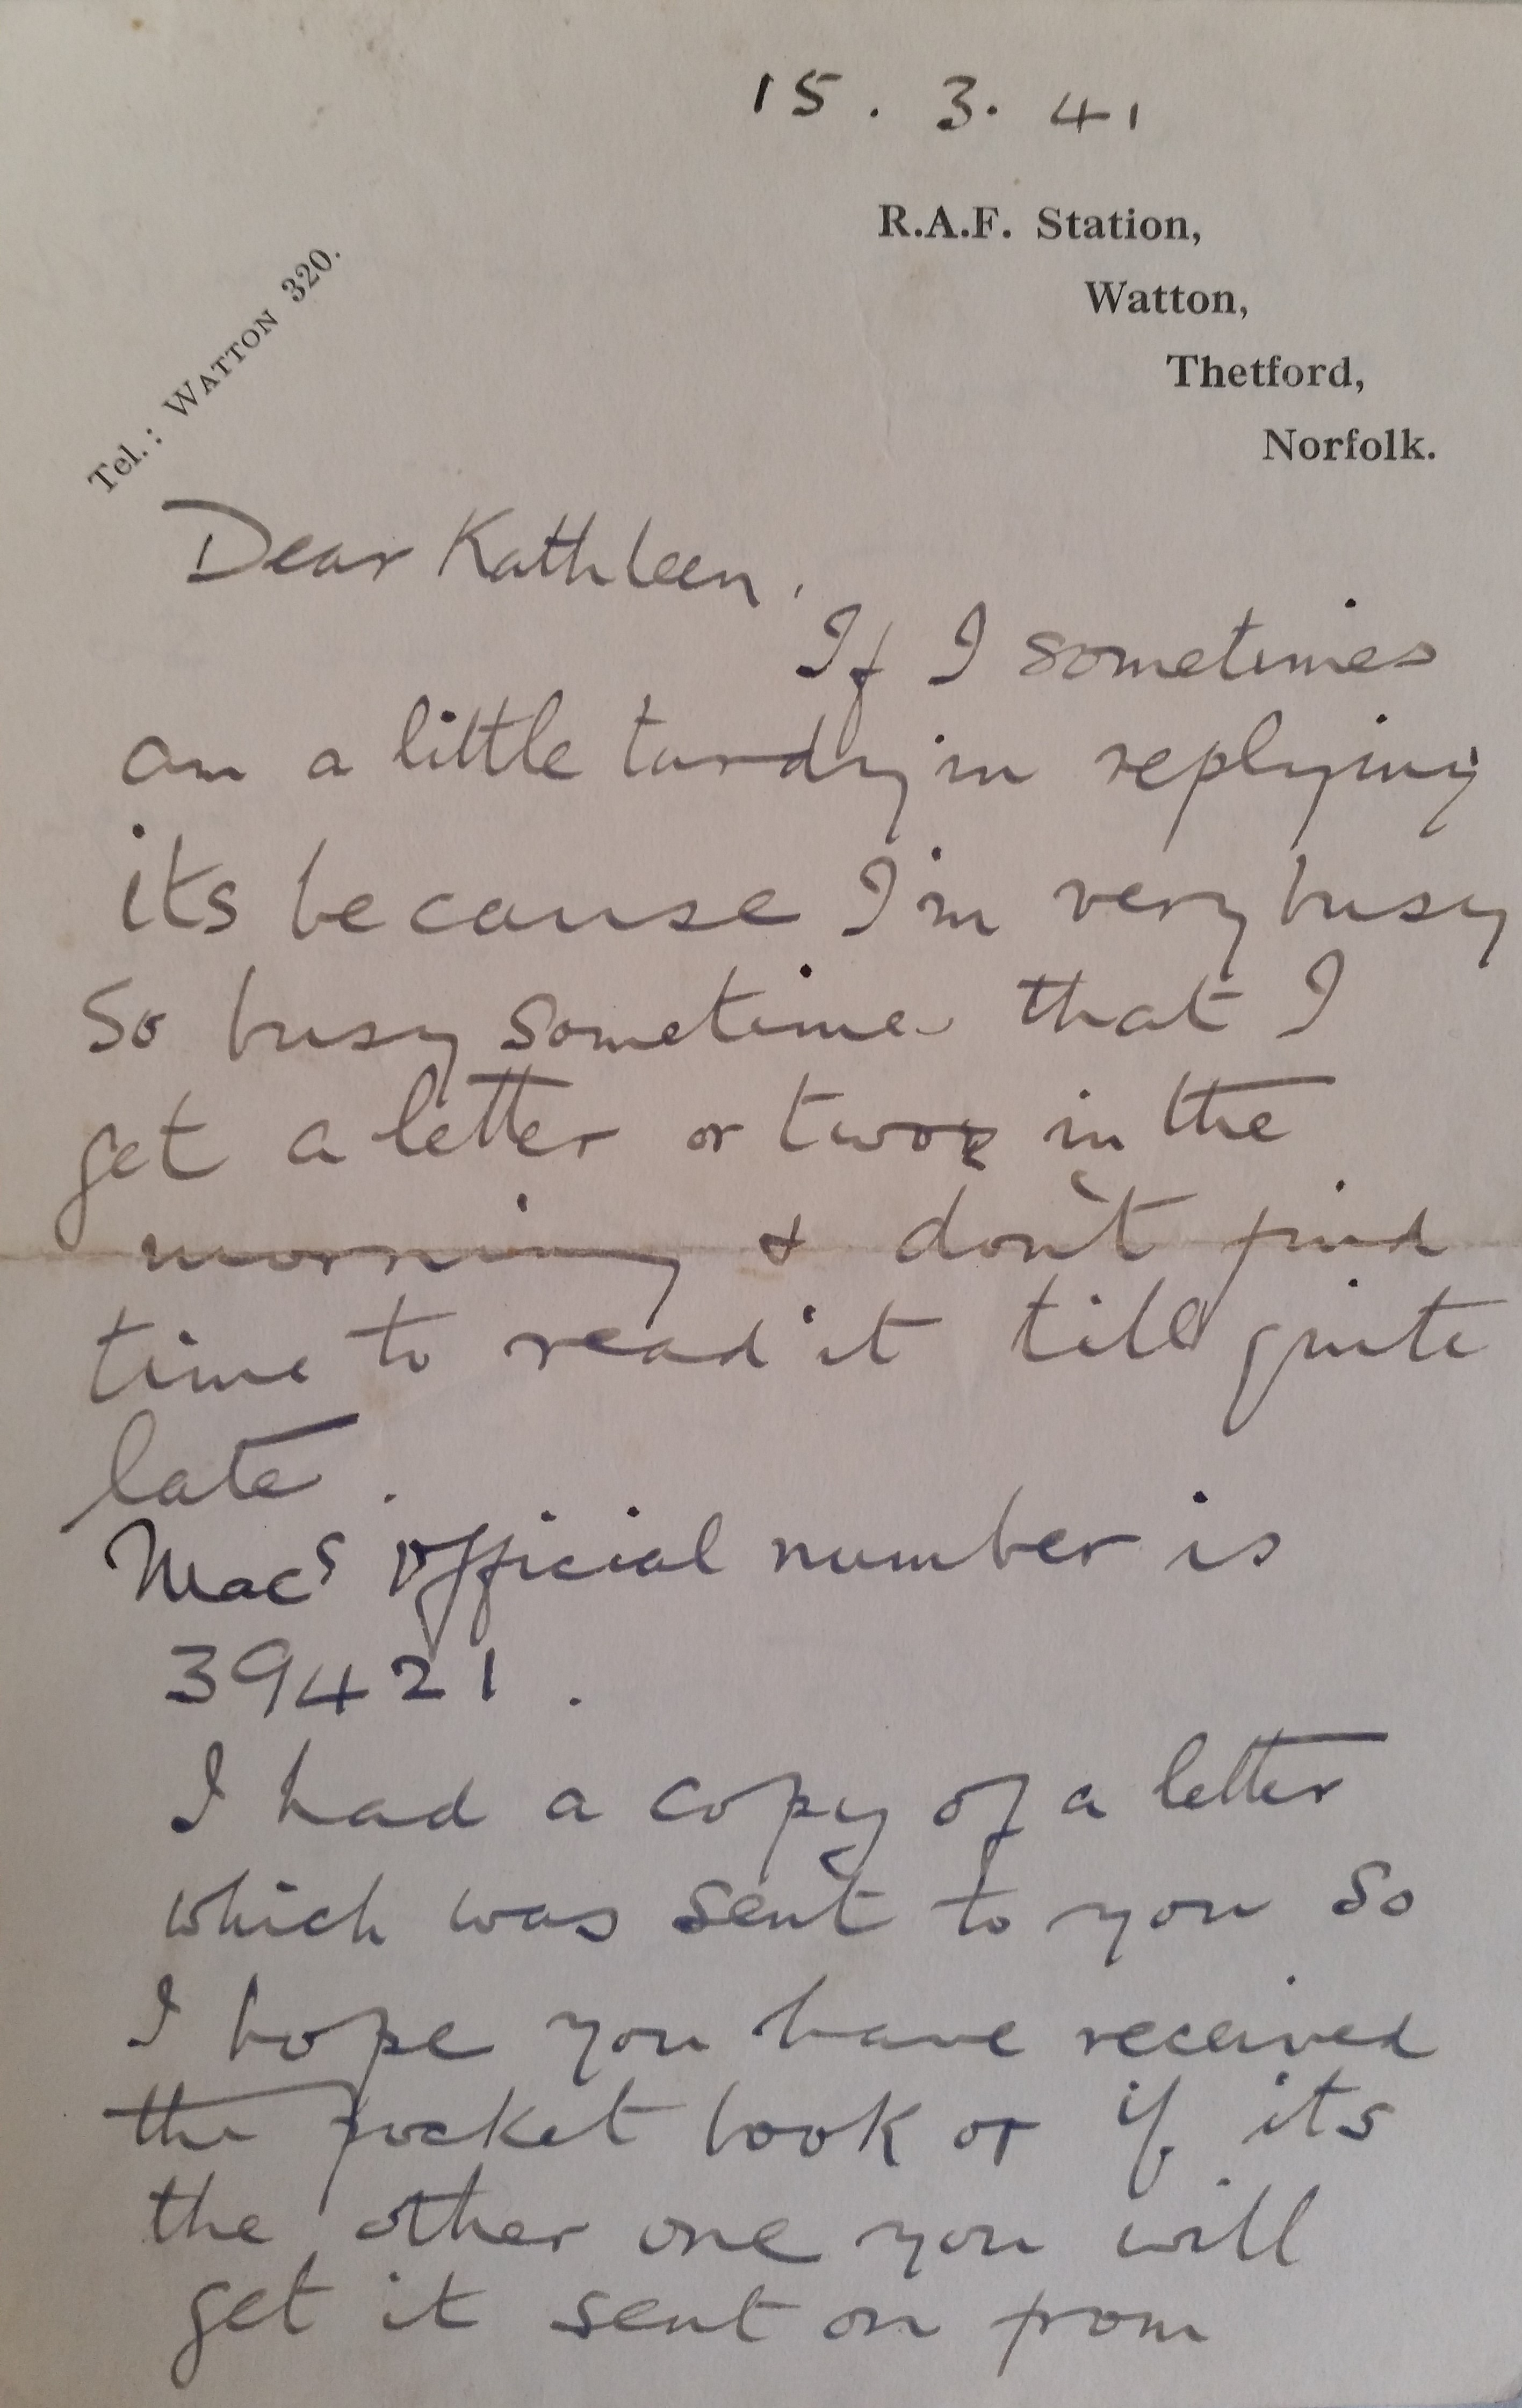 15th-march-1941-letter-delap-to-kathleen-1of2